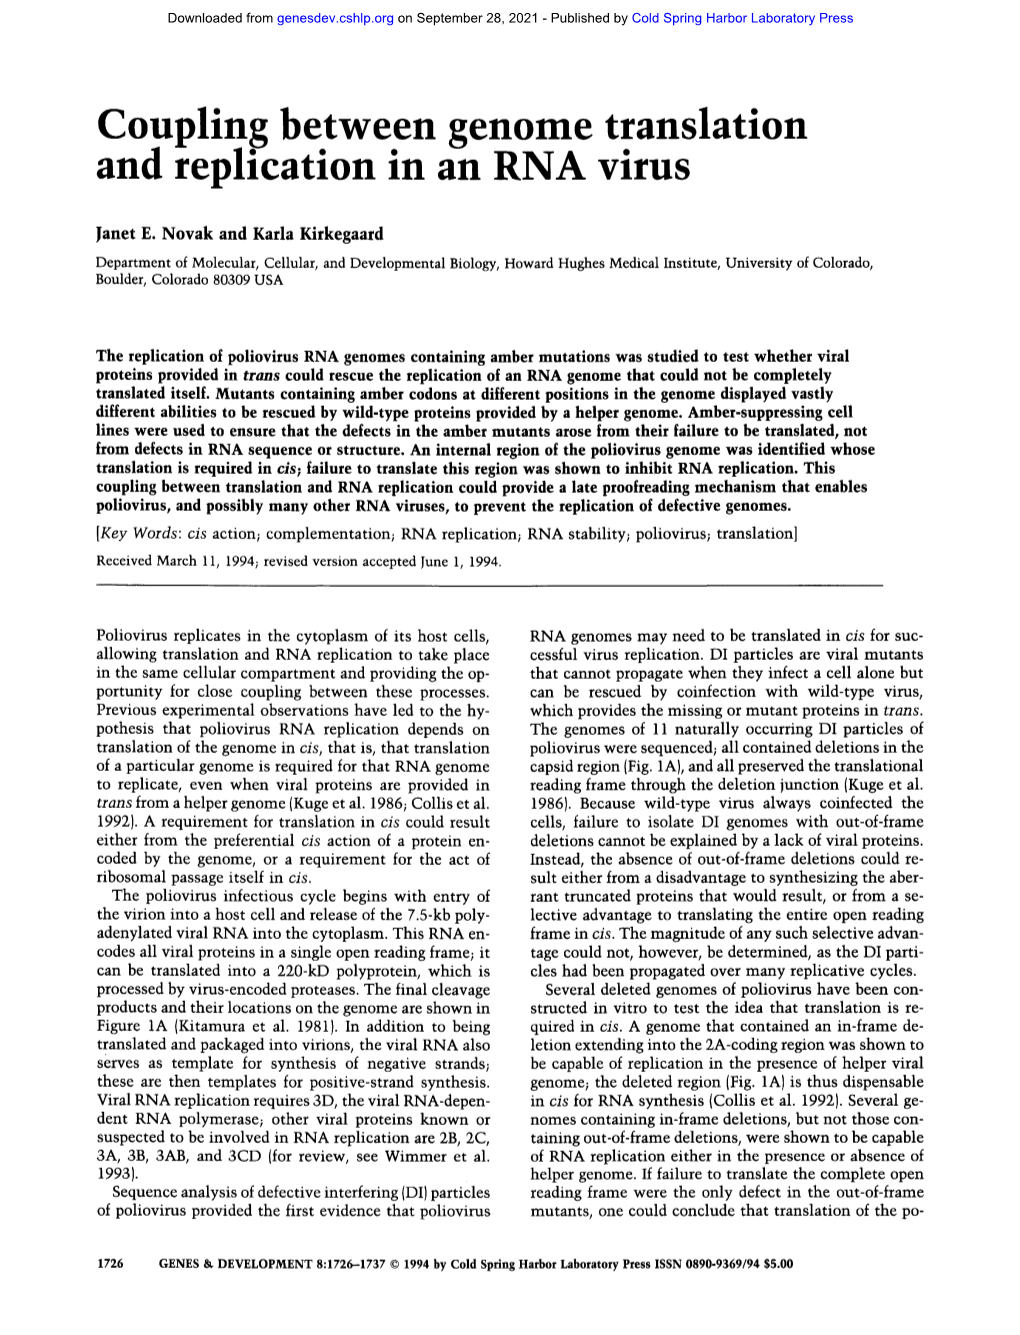 Coupling Between Genome Translation and Replication in an RNA Virus